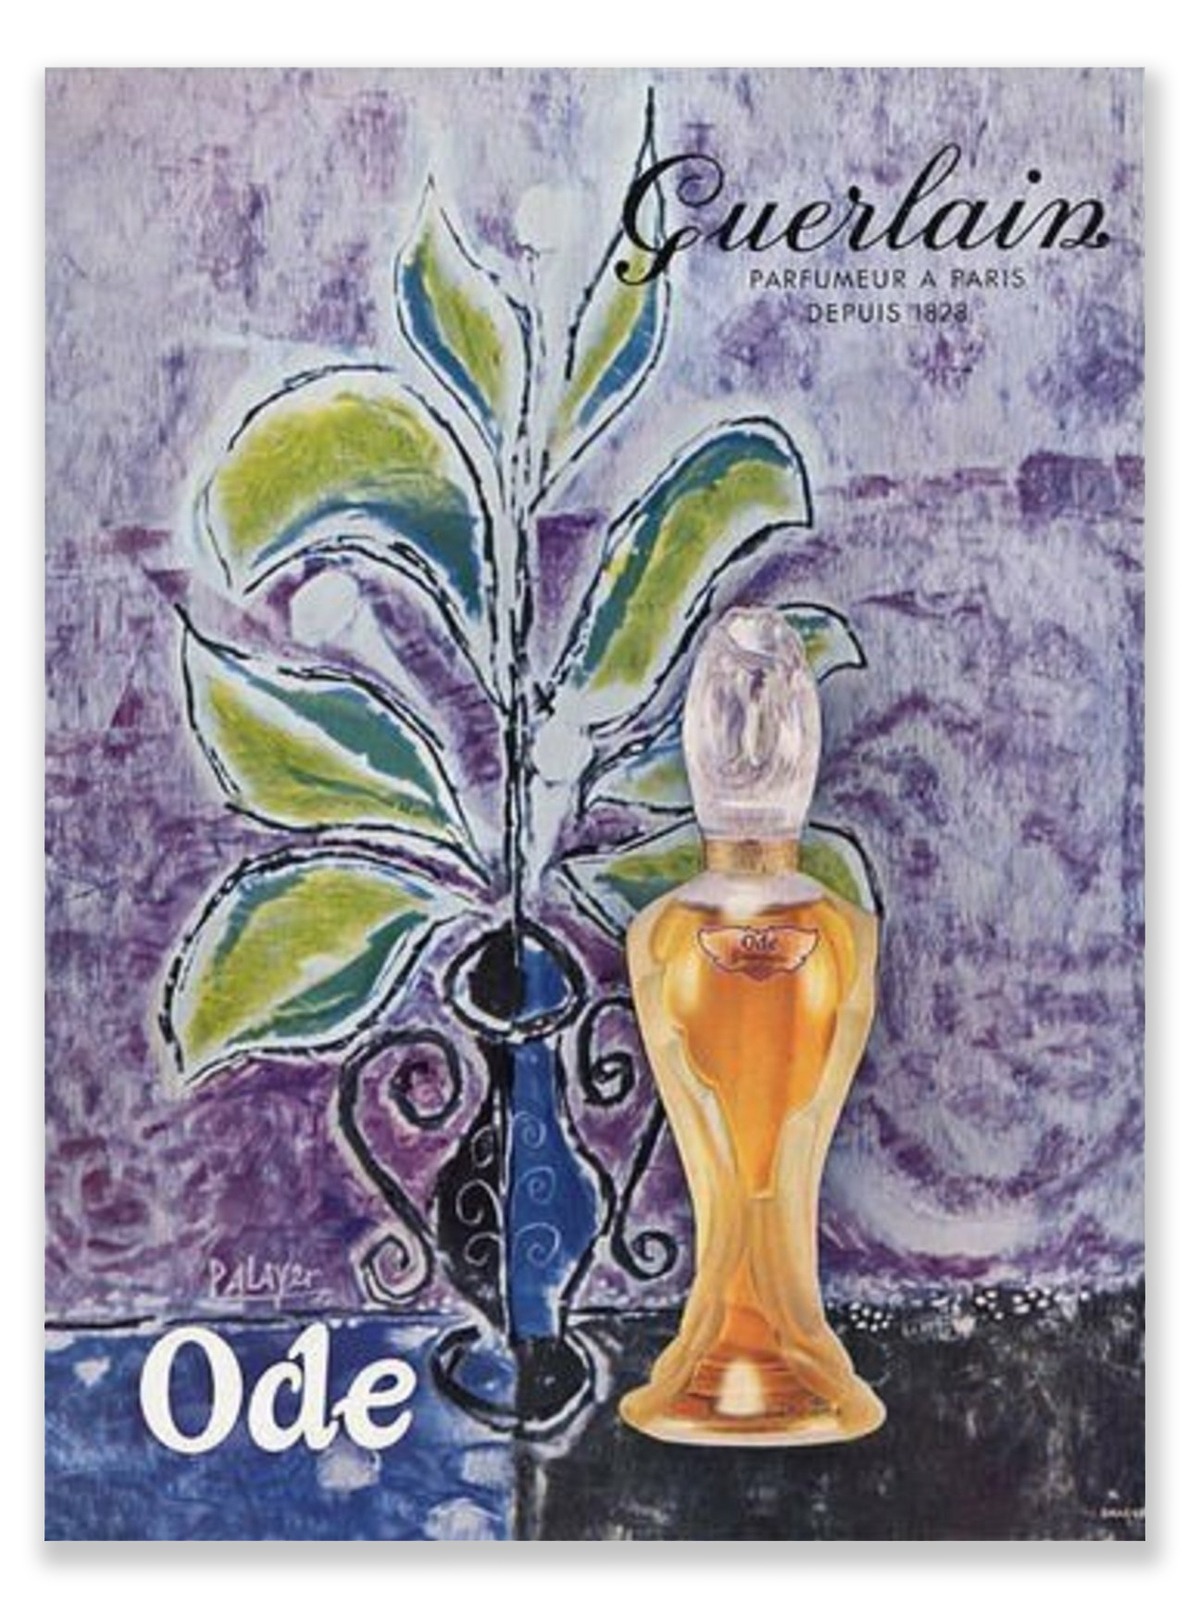 'Ode' - the last fragrance by Jacques Guerlain